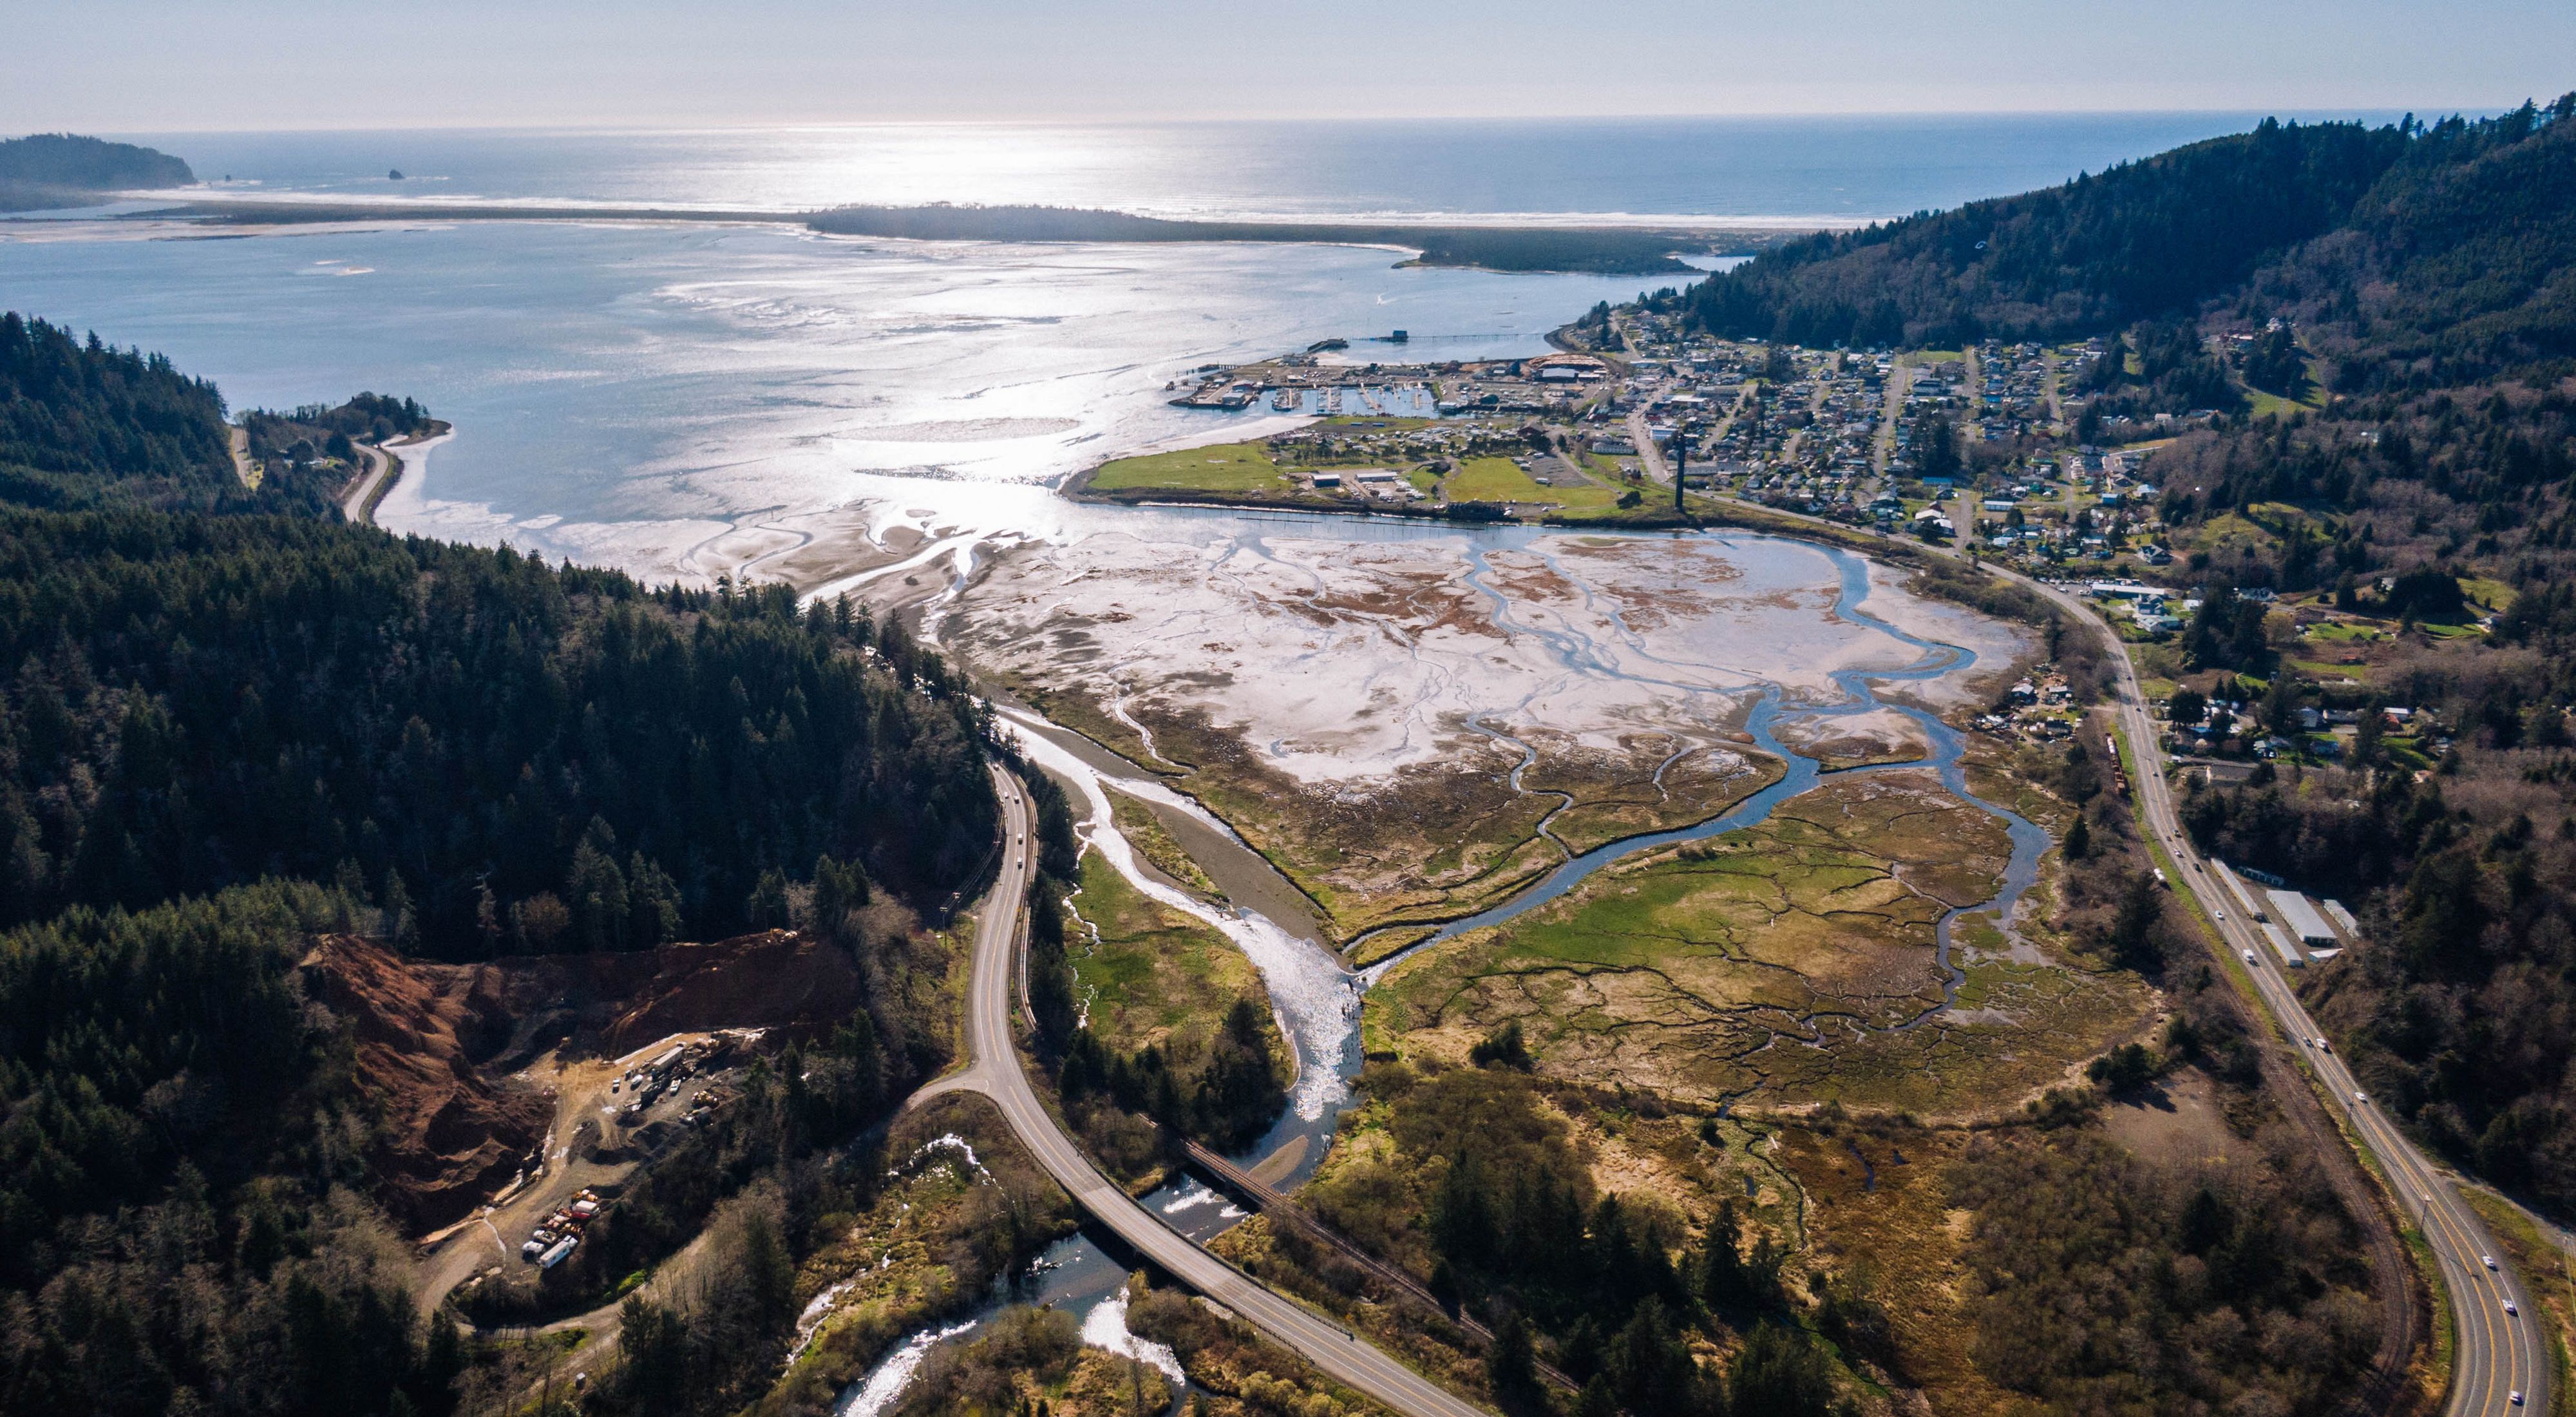 Aerial view of an estuary with meandering and interconnecting streams flowing into a coastal bay, between a town and forests, all along a coastal highway.